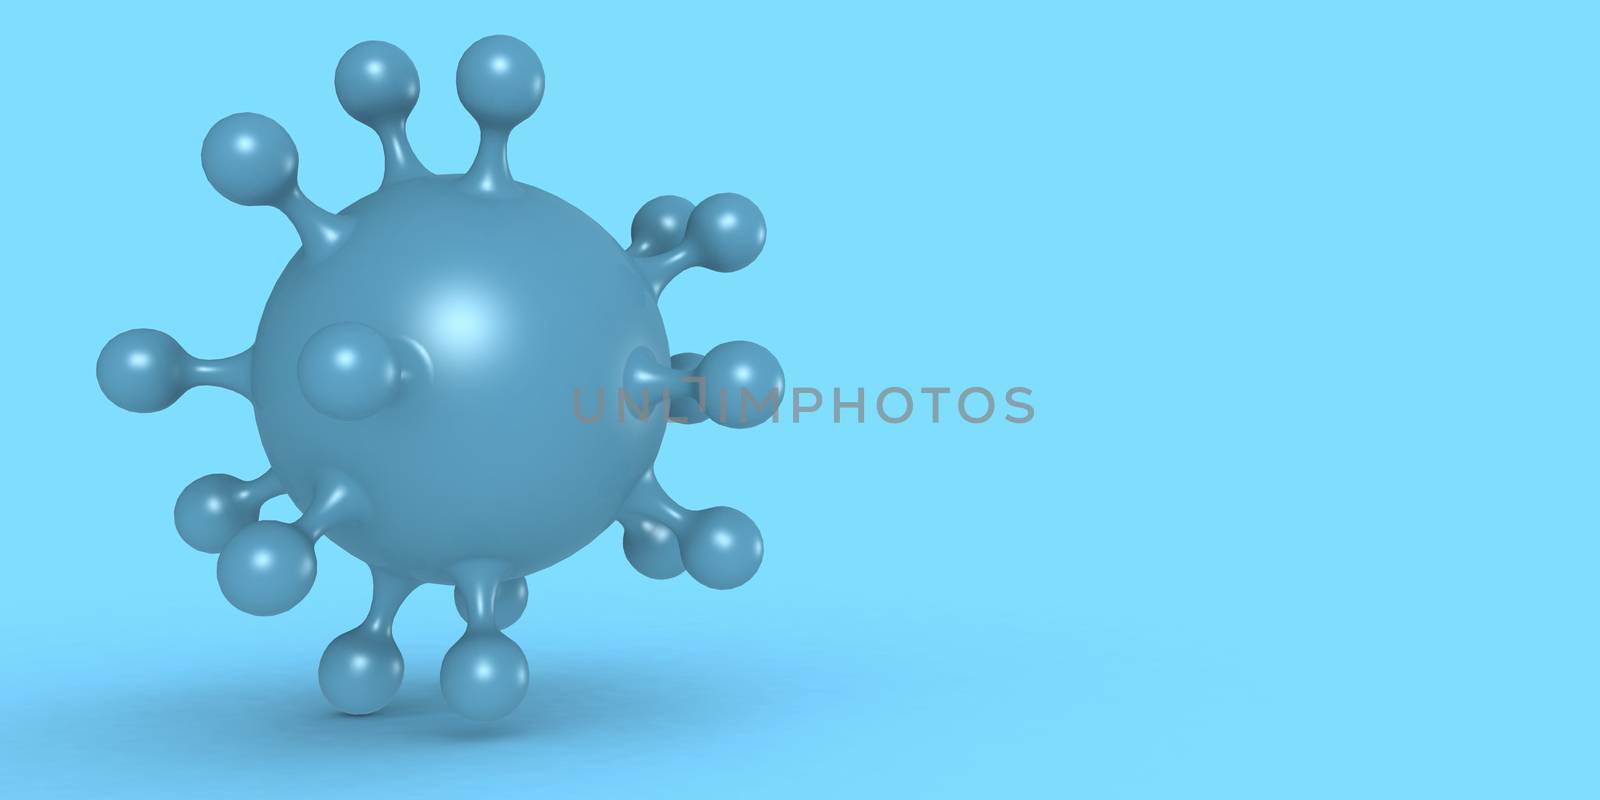 Corona virus cell in blue color background by tang90246